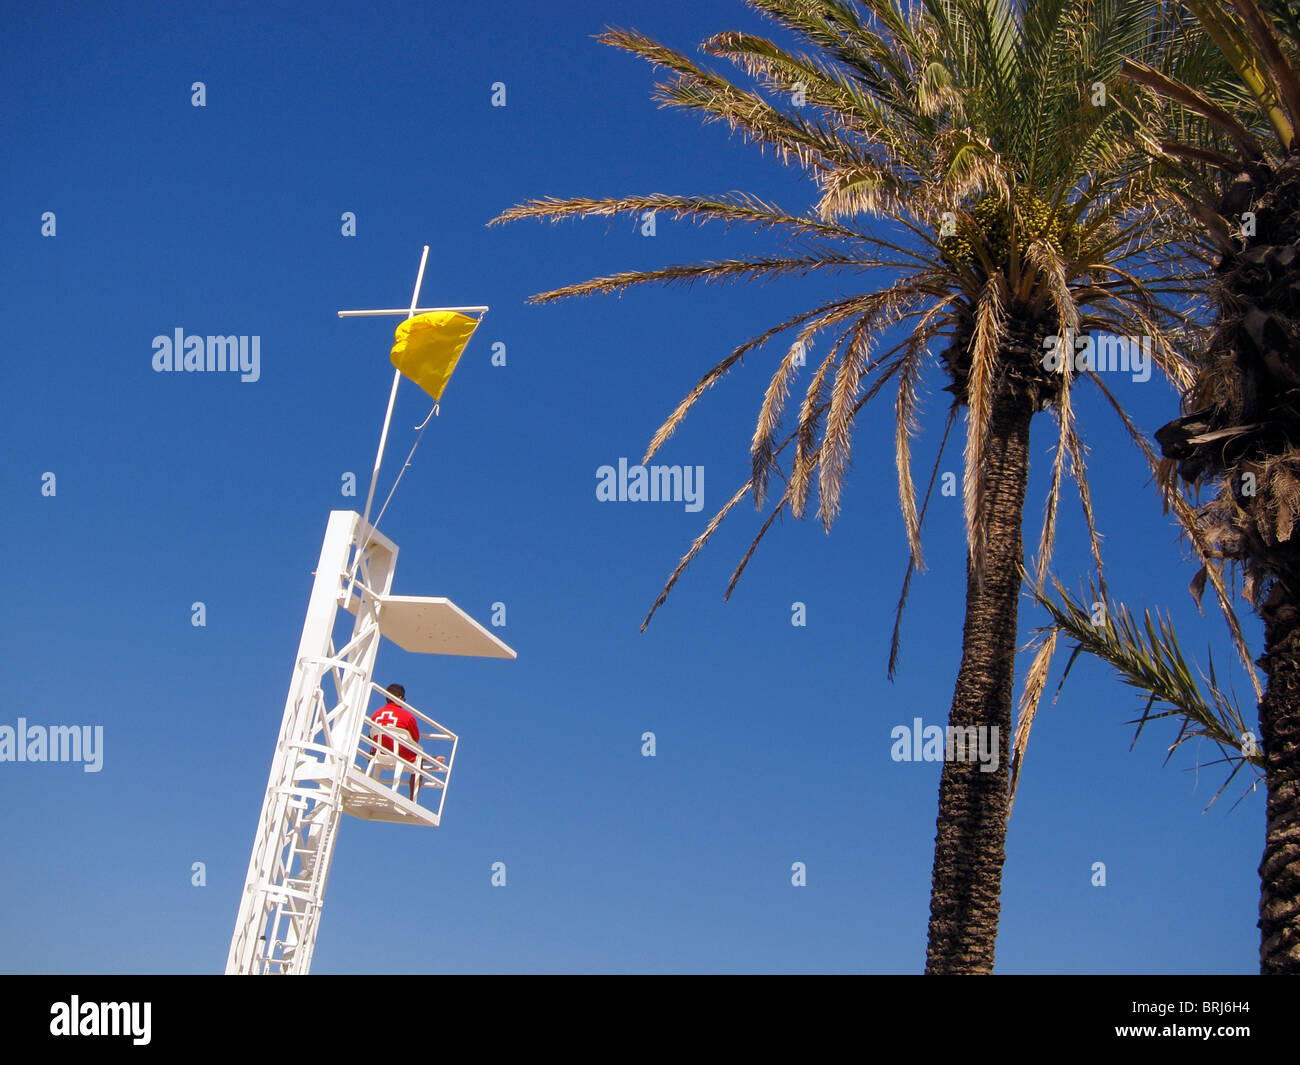 A coast guard tower on the beach in the Spanish seaside town of Javea Stock Photo